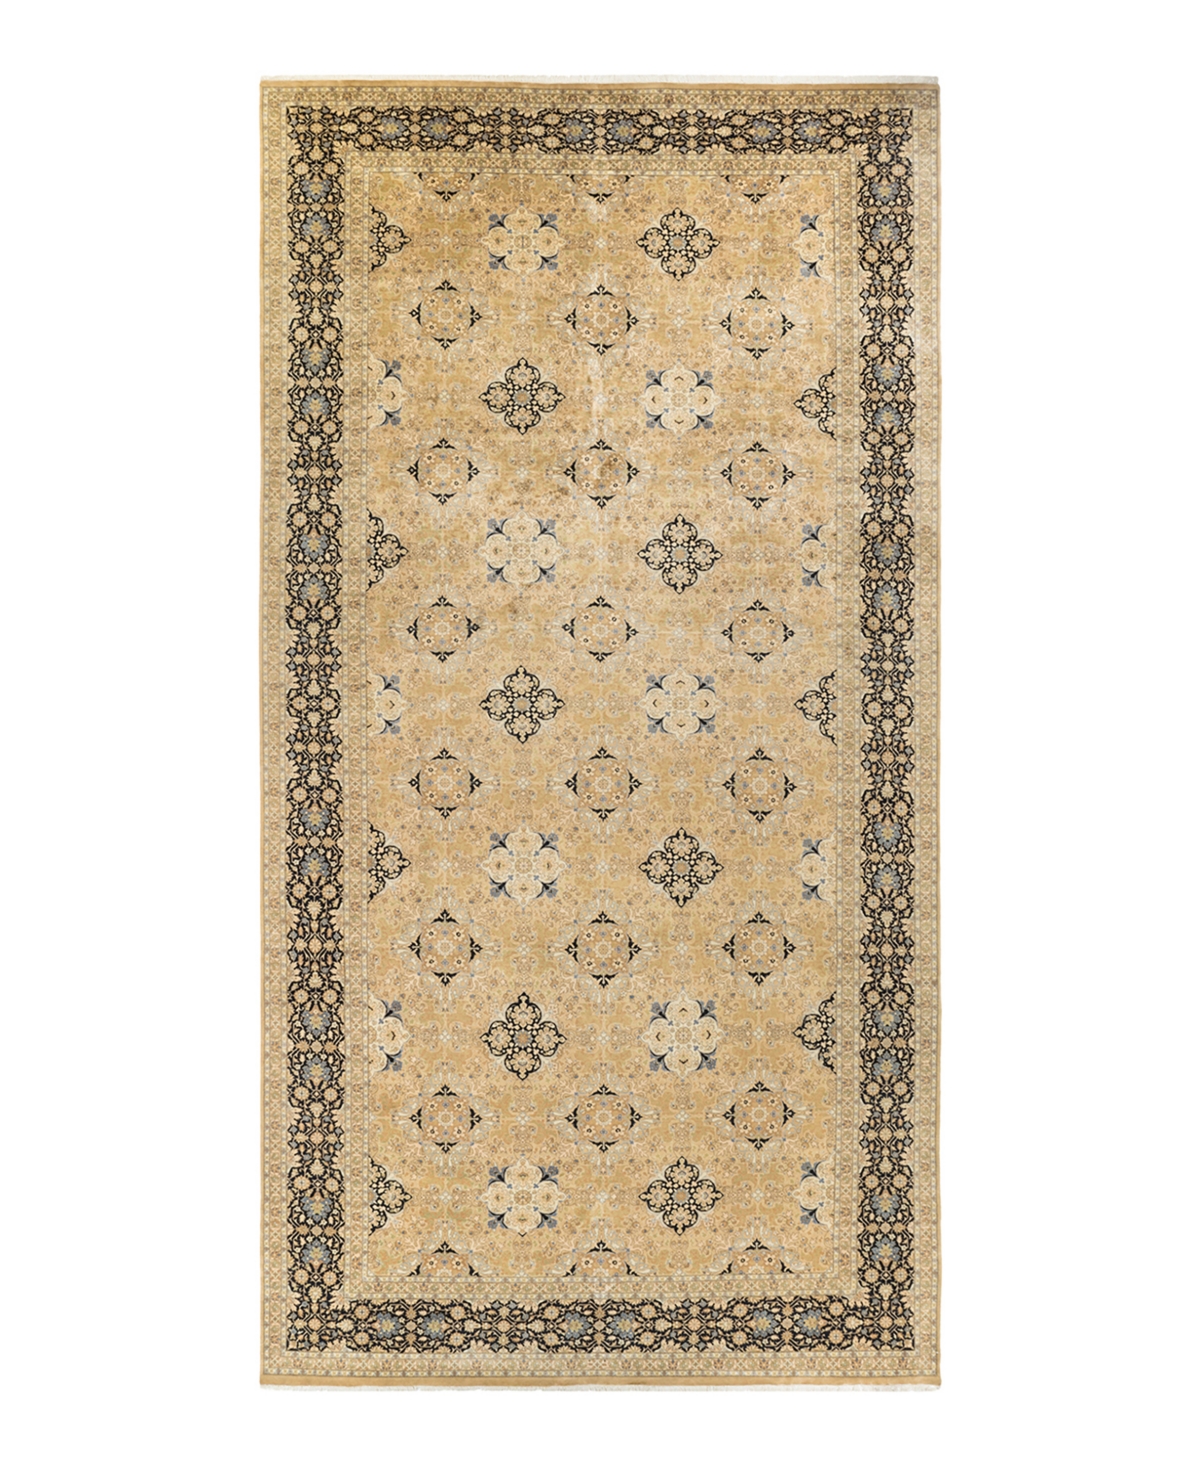 Closeout! Adorn Hand Woven Rugs Mogul M1205 9'2in x 18'8in Runner Area Rug - Gold-Tone